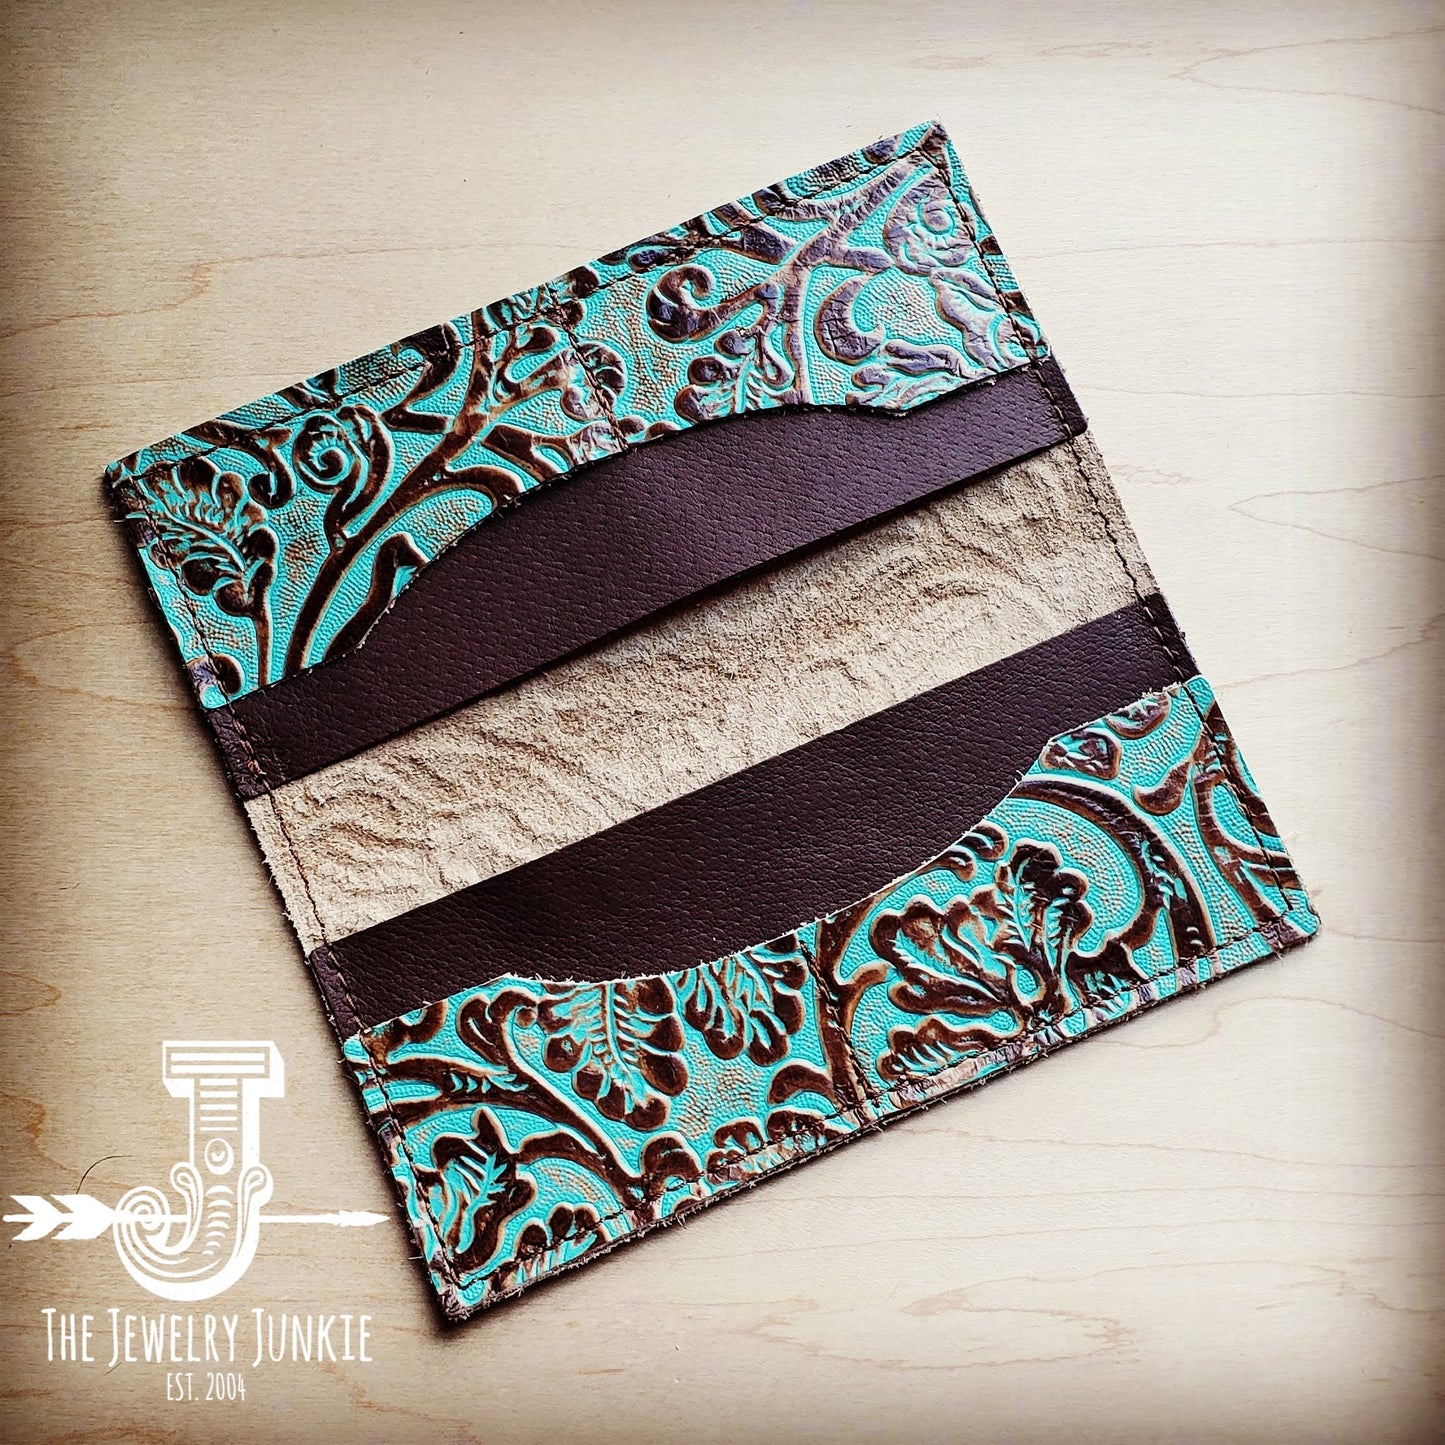 Embossed Leather Wallet in Cowboy Turquoise 301d